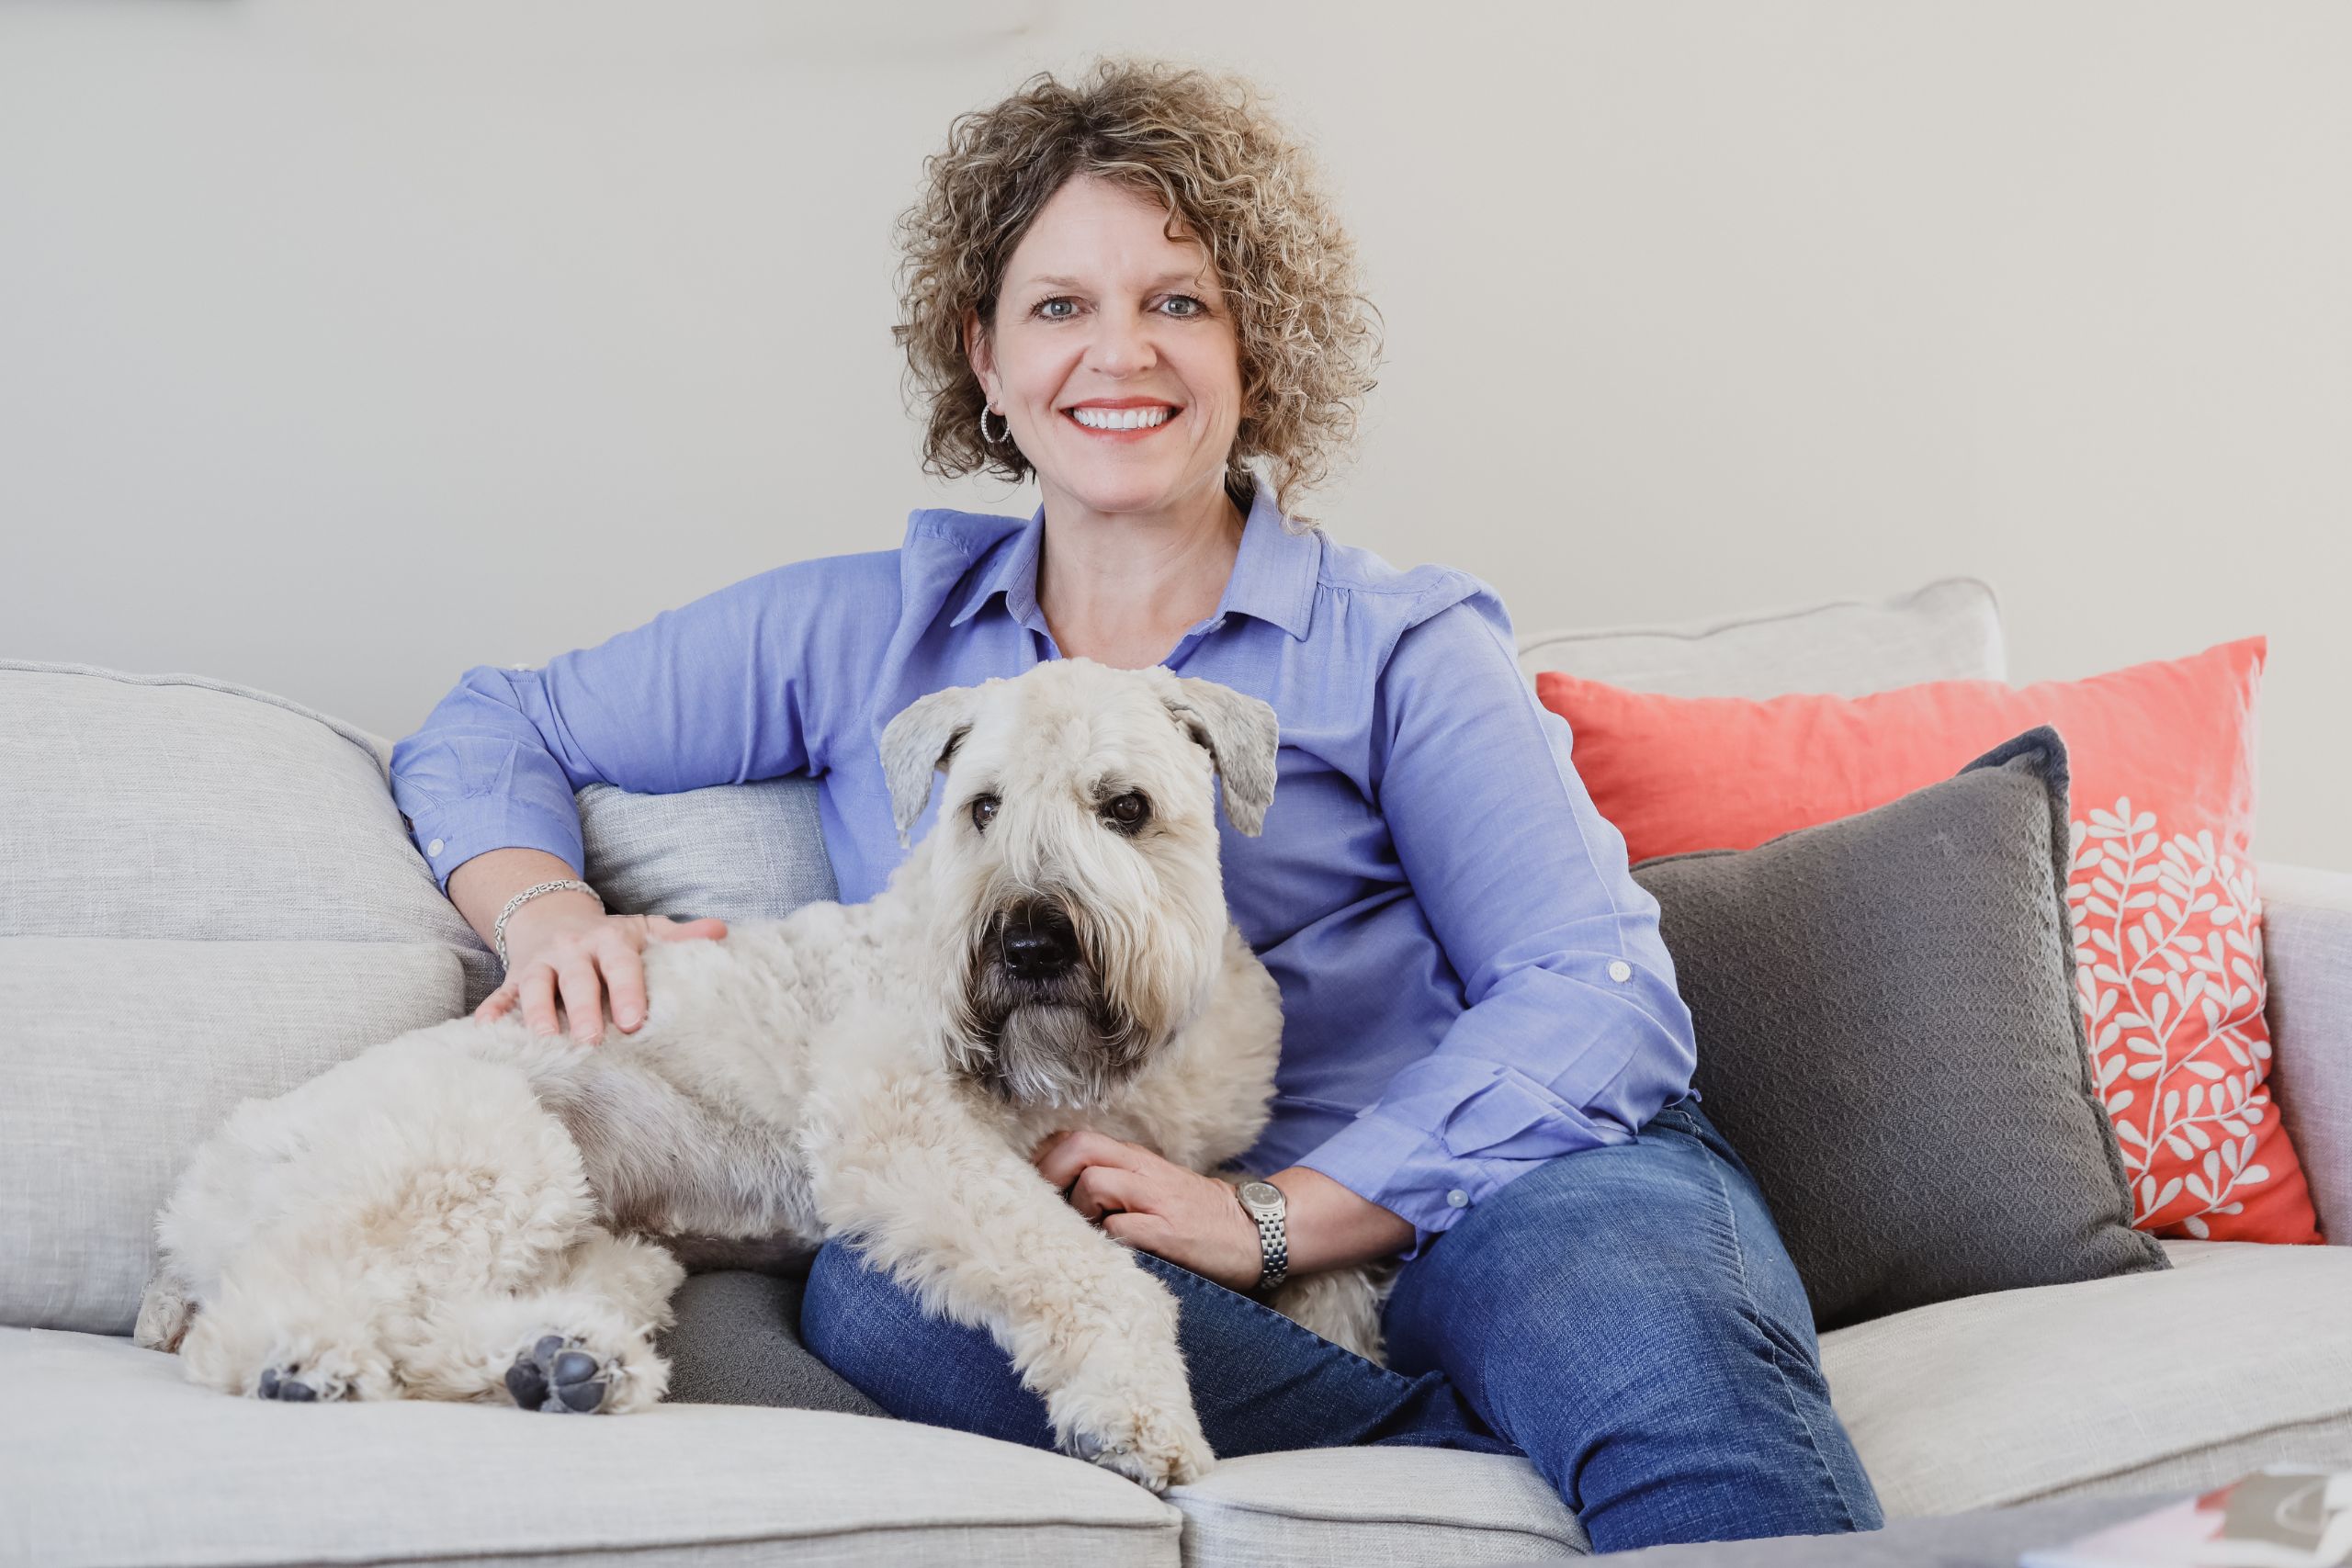 A woman poses with her dog on a couch